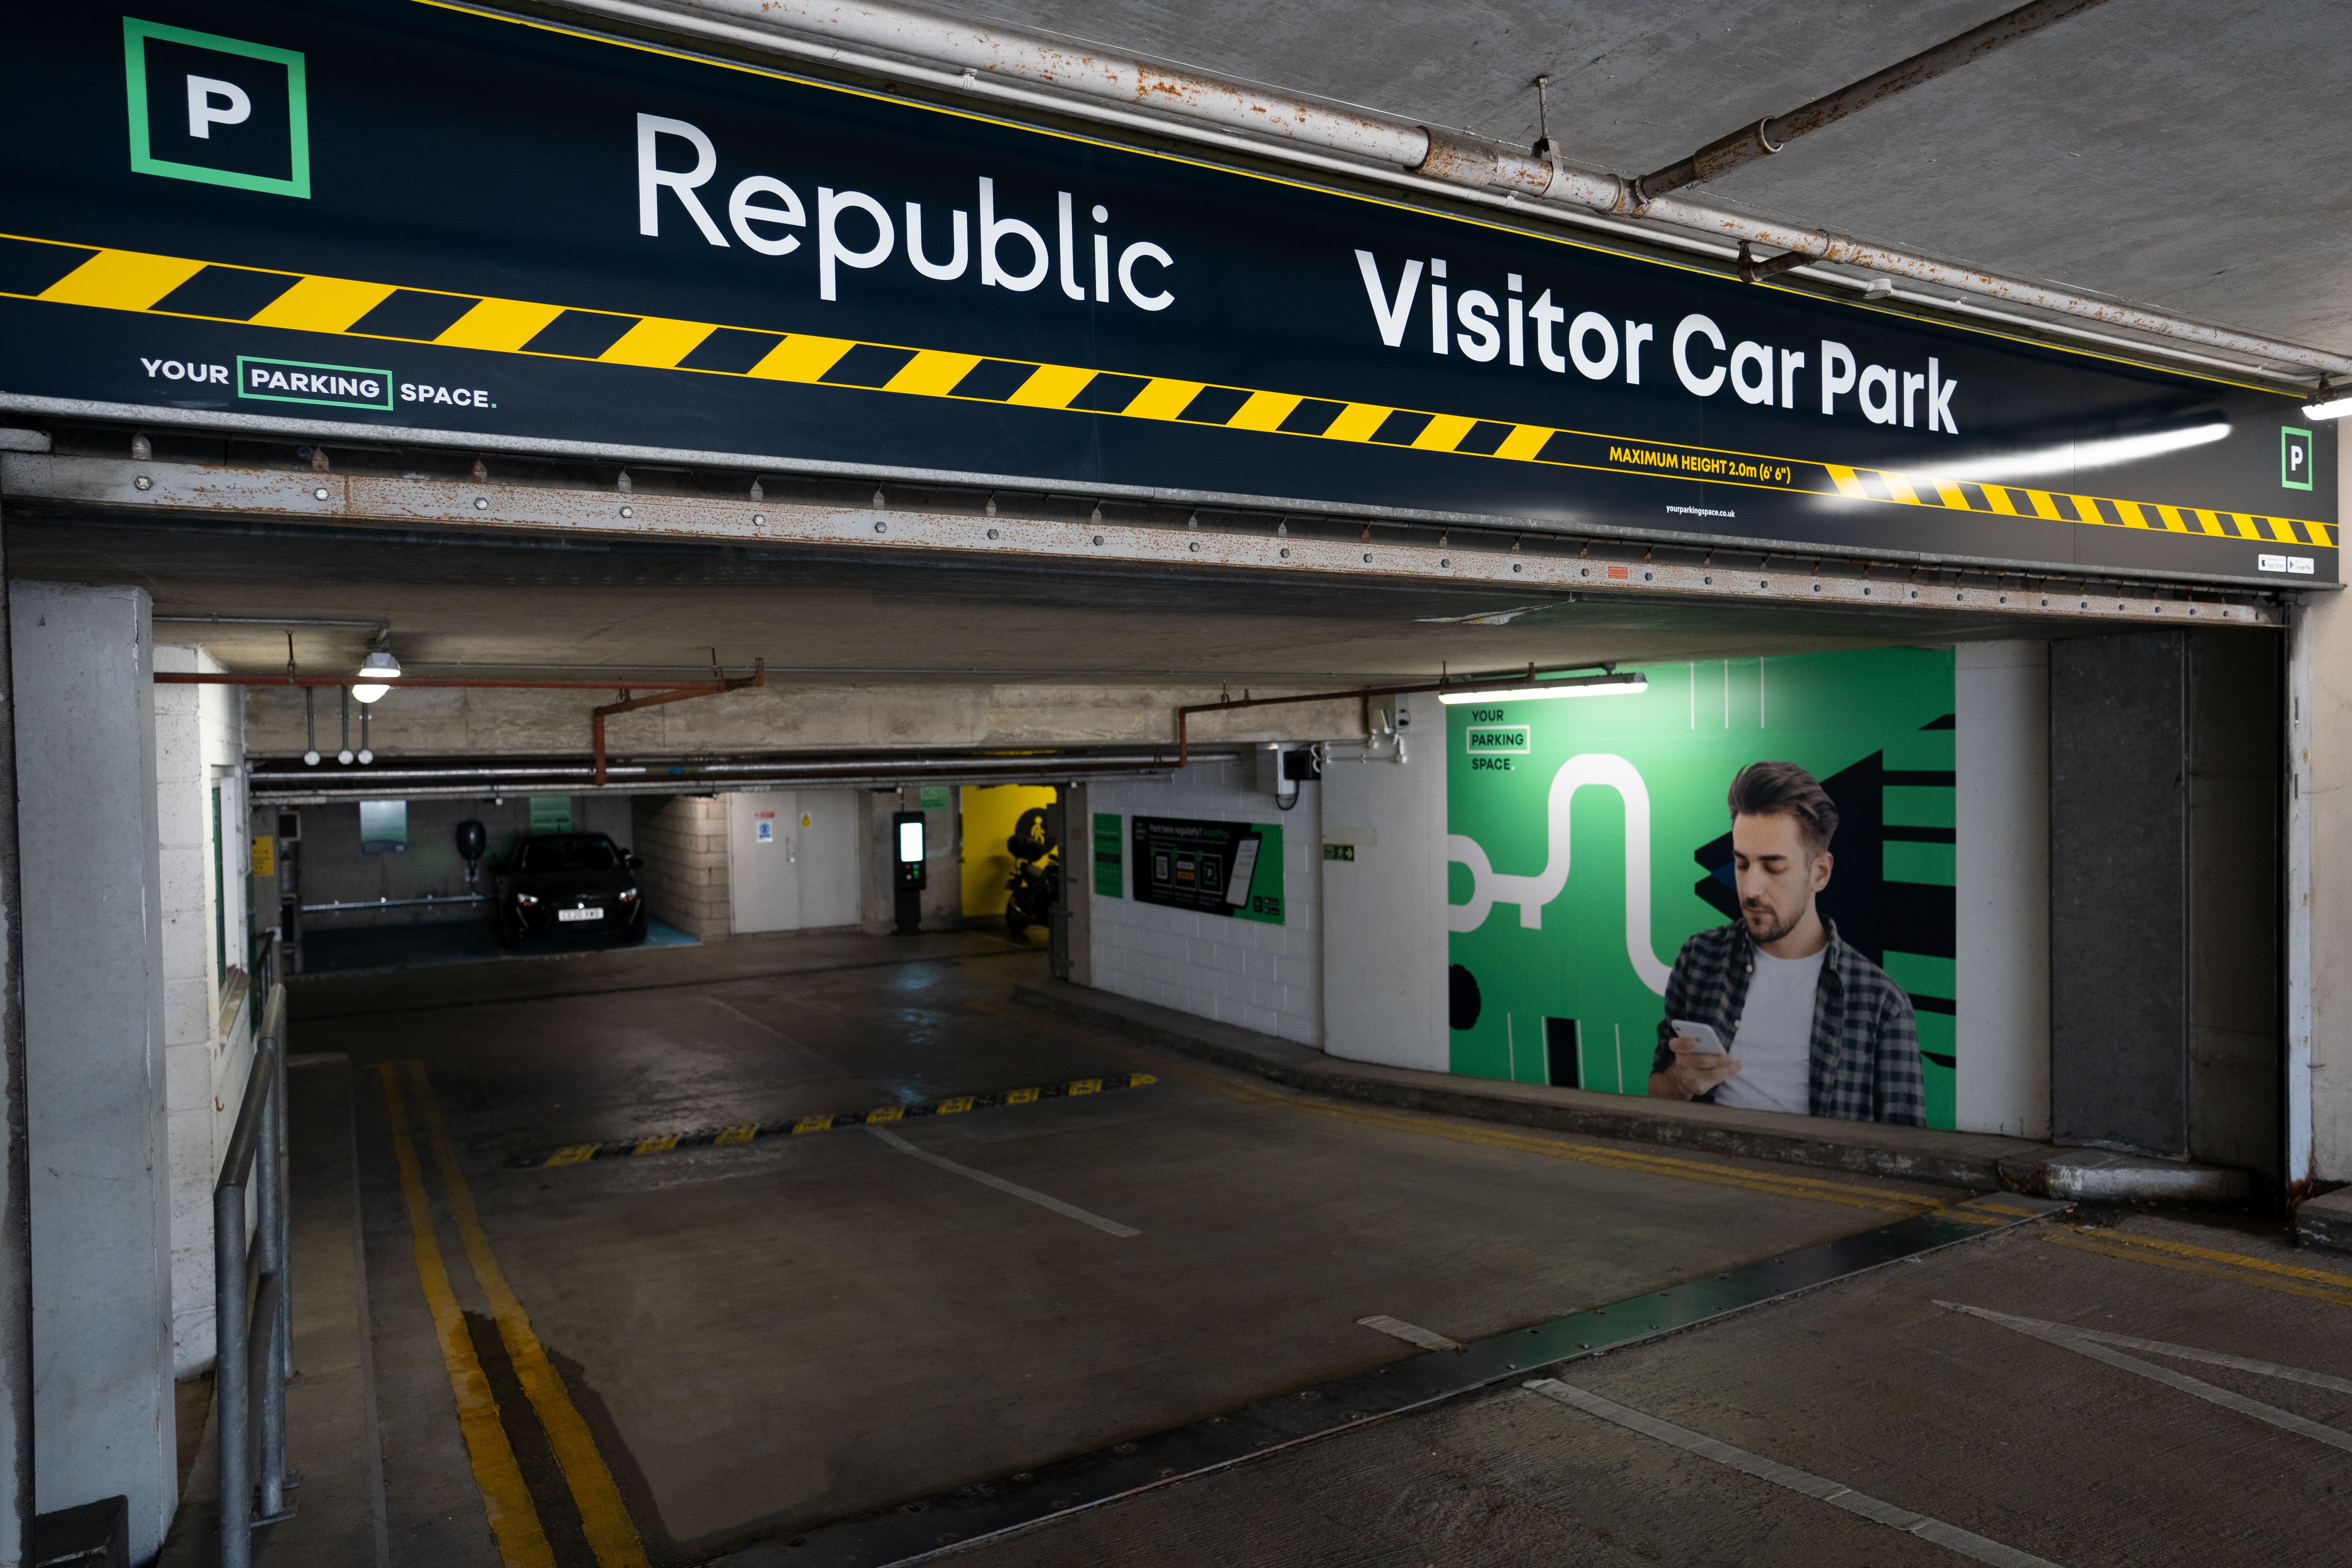 YourParkingSpace.co.uk has collaborated with environmental consultants Circular Ecology to announce the launch of the world’s first carbon neutral car park of its kind